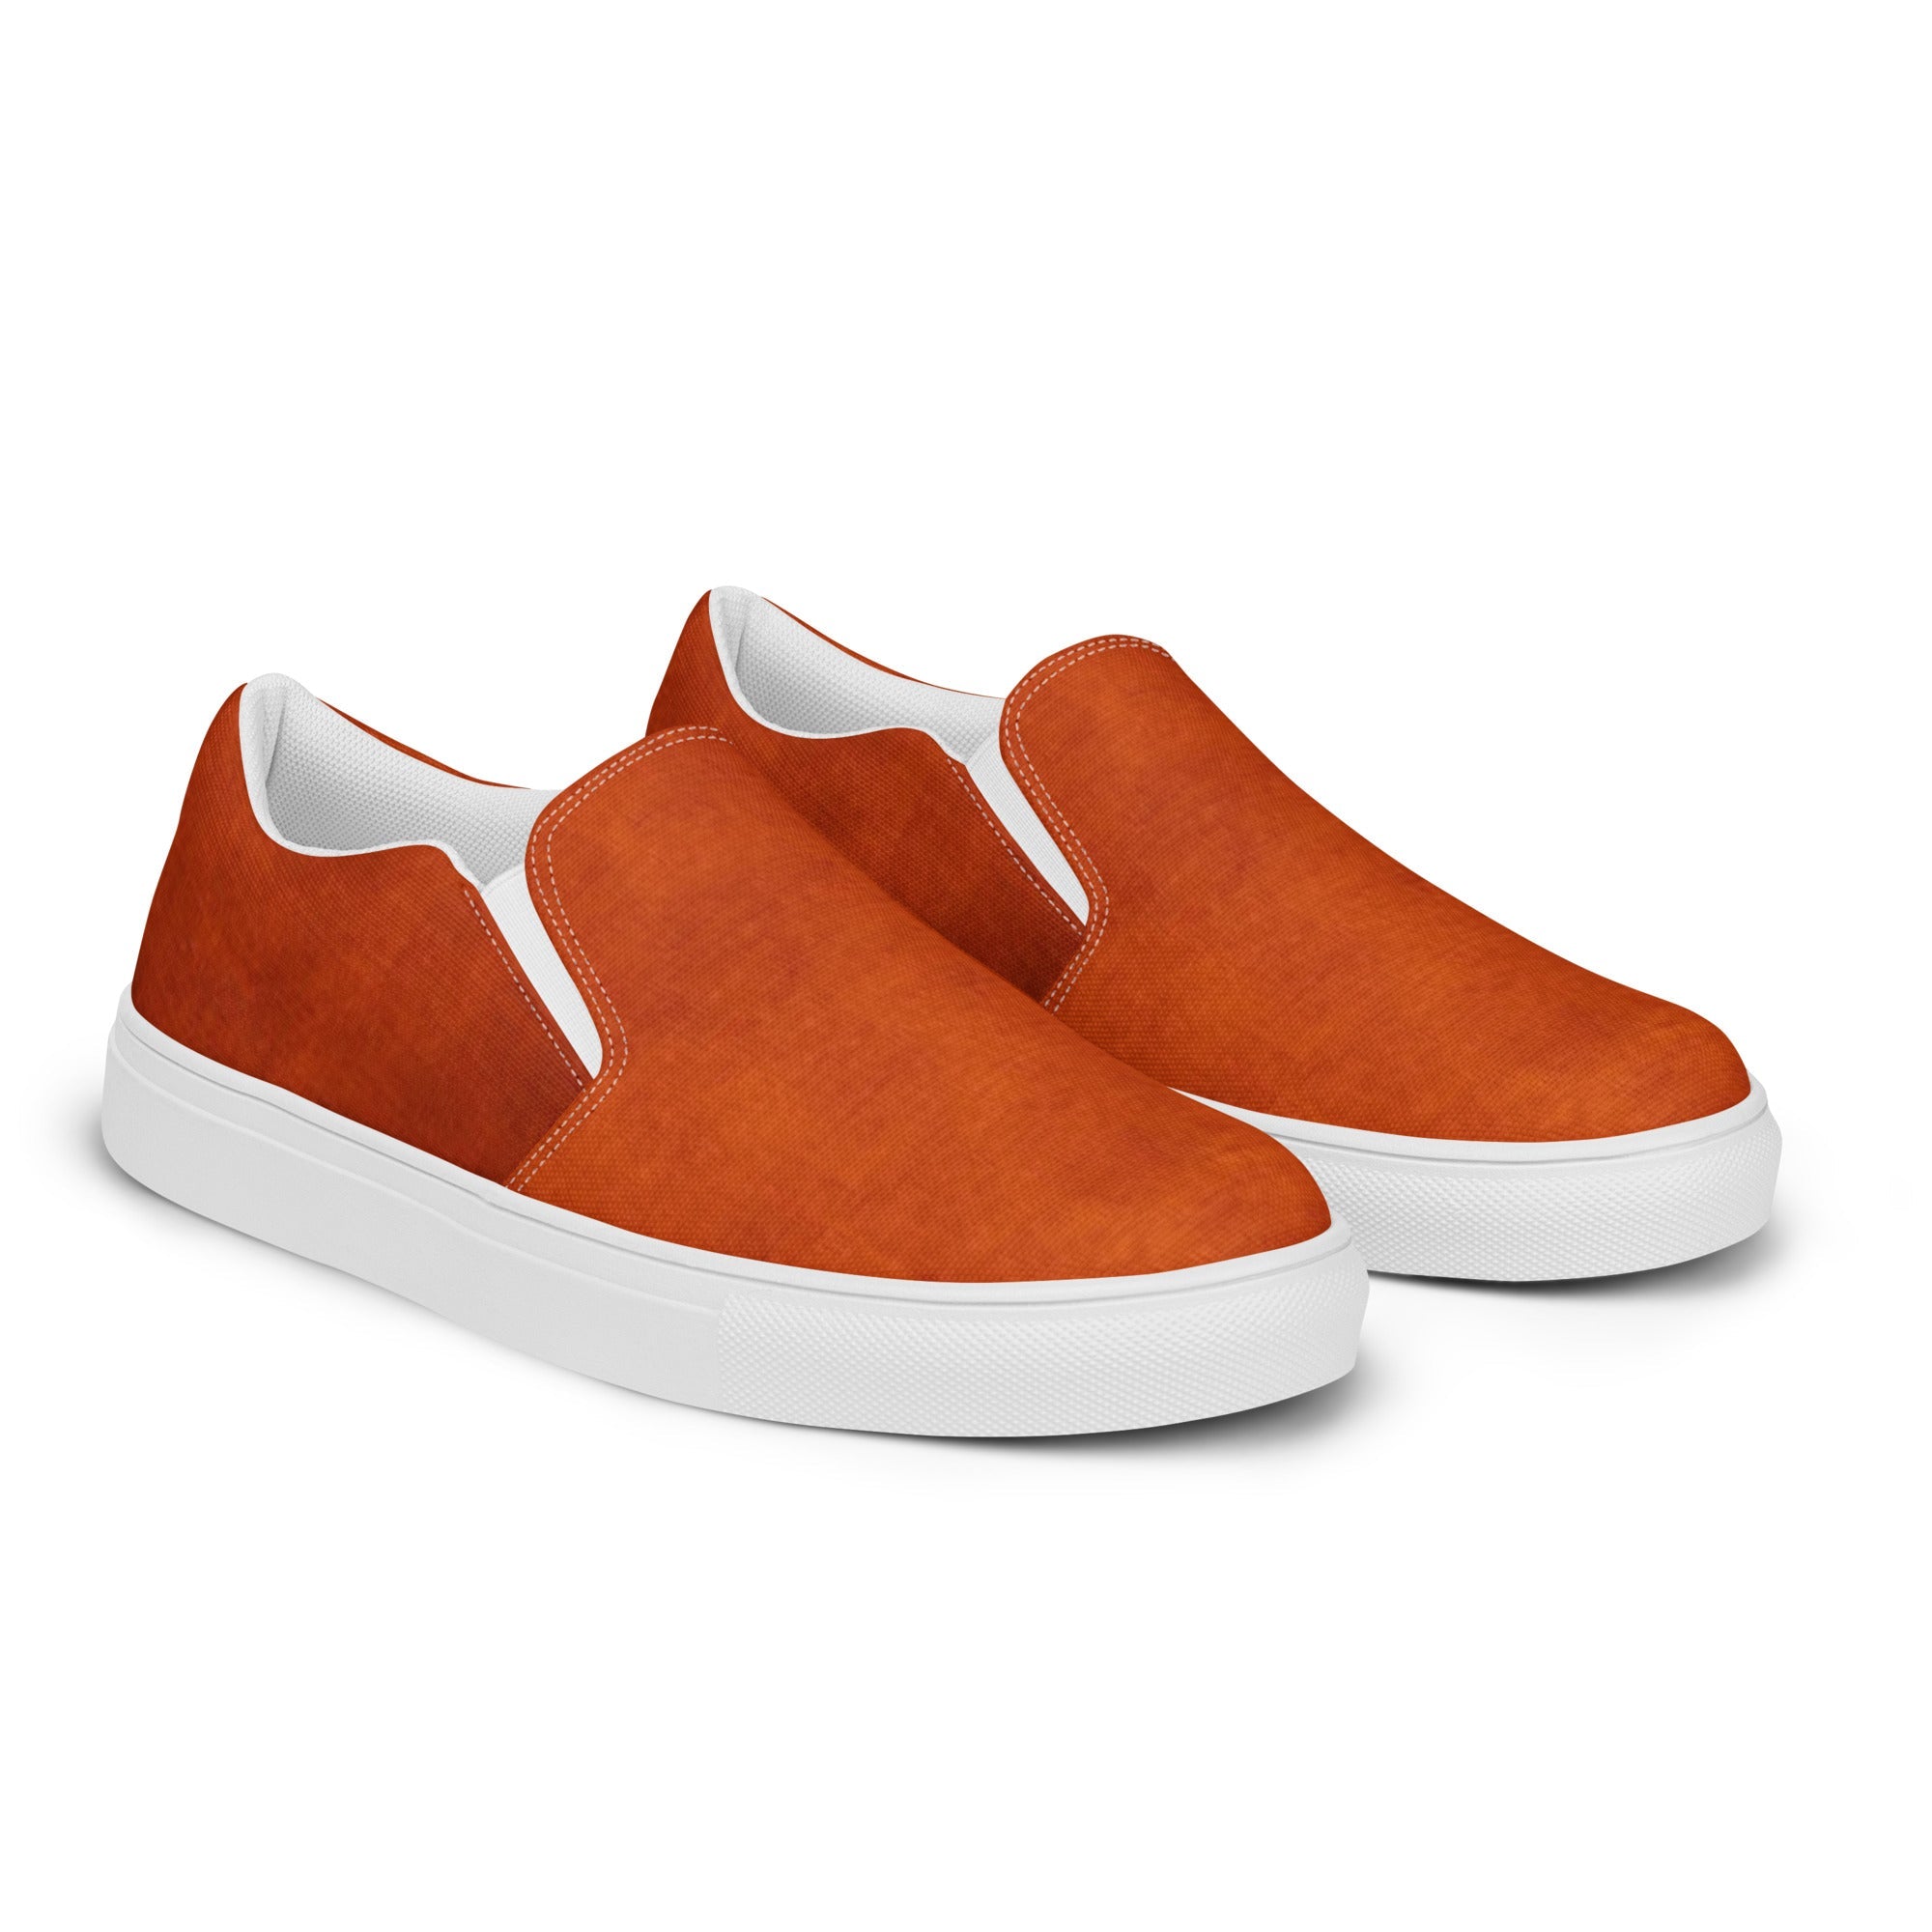 Womens slip-on canvas shoes